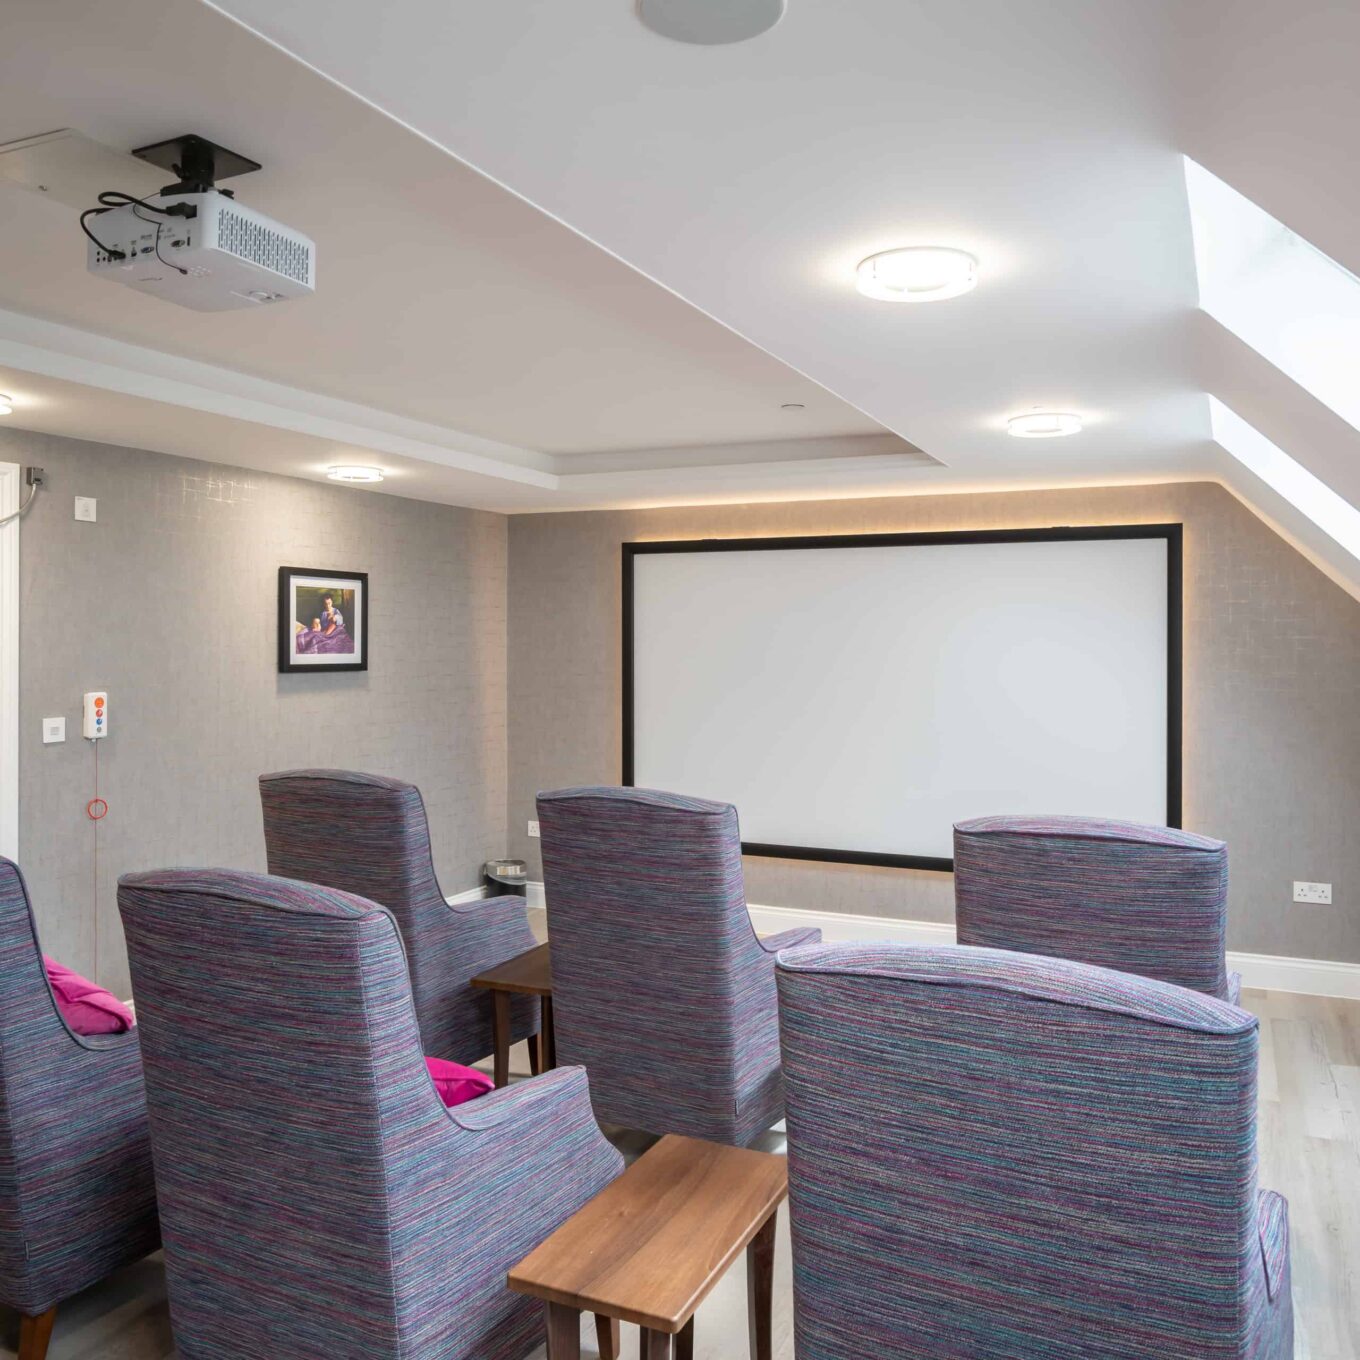 Cinema room at Elmbrook Court Care Home Wantage, Oxfordshire